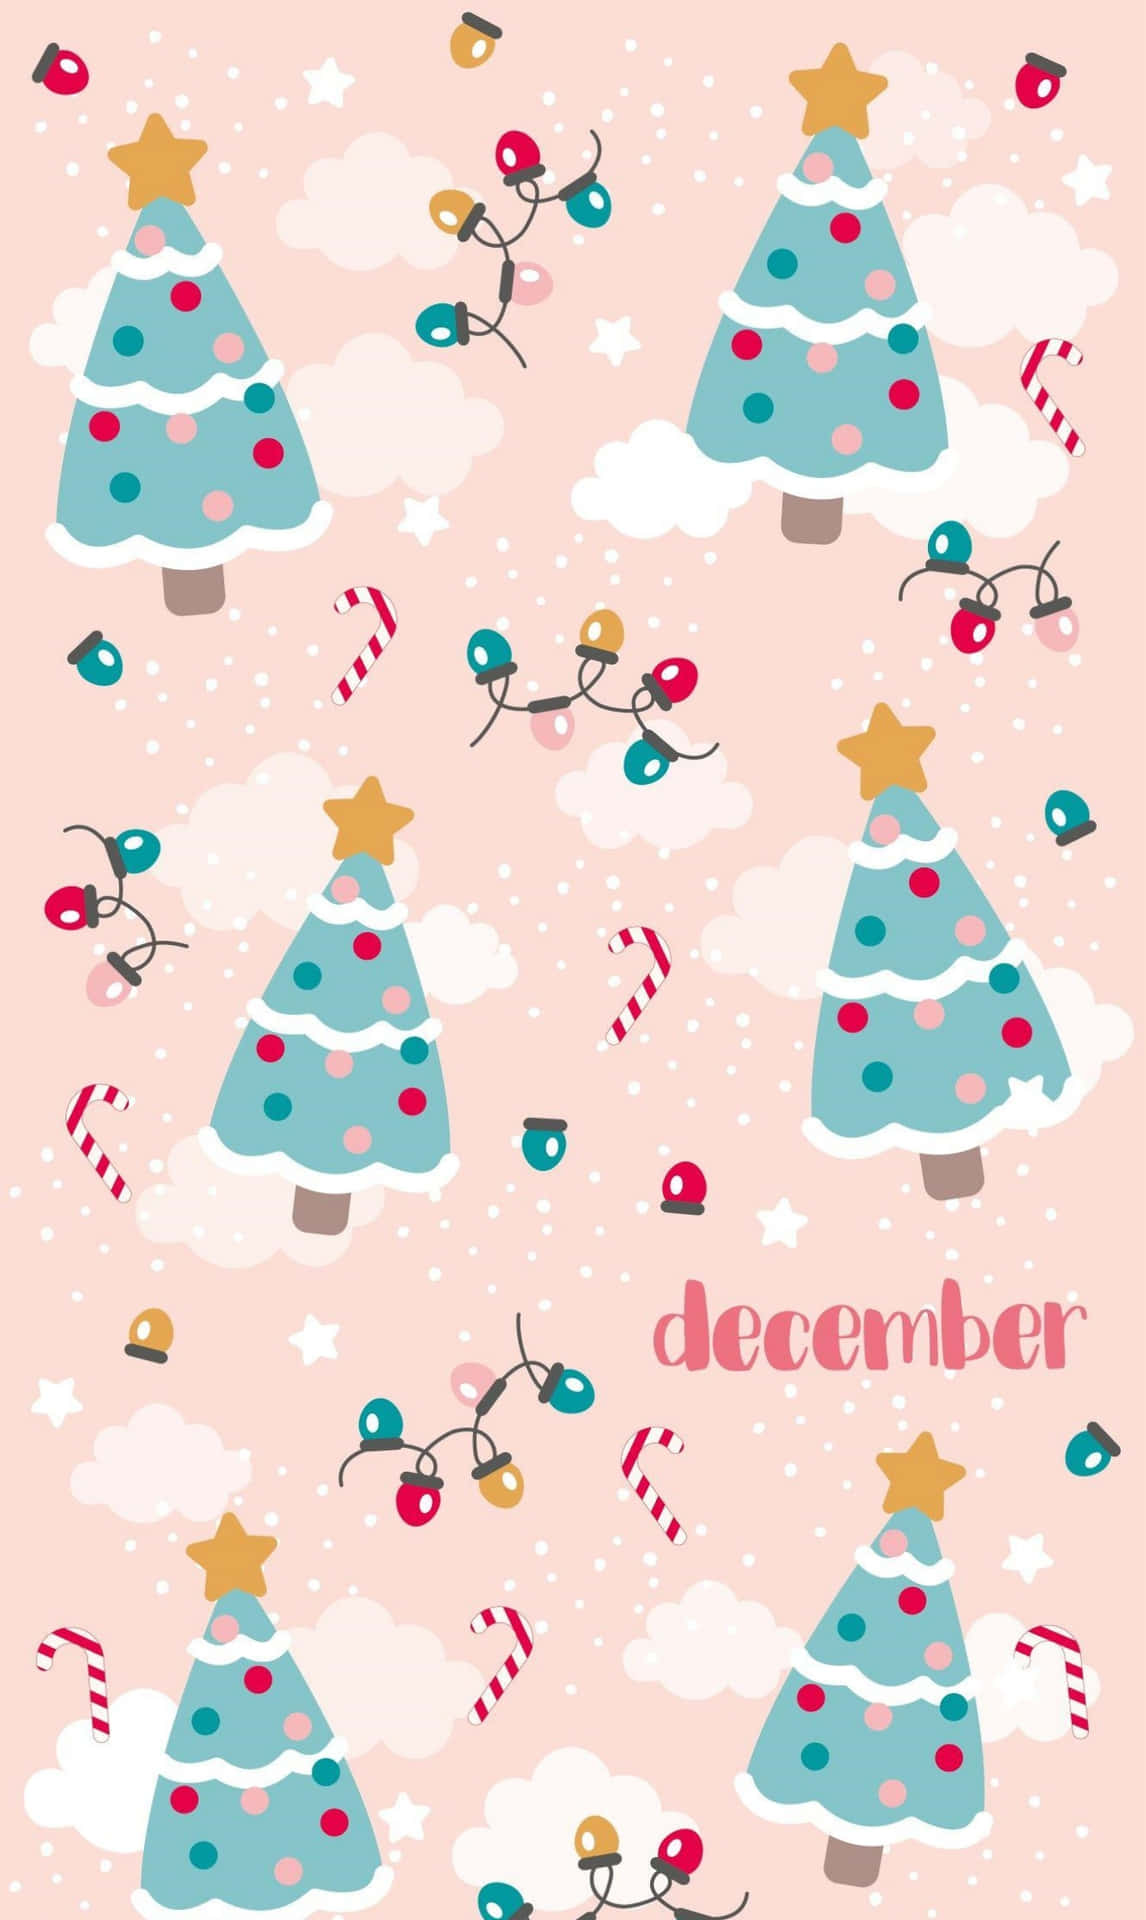 Image  A festive phone decorated with holiday decorations. Wallpaper